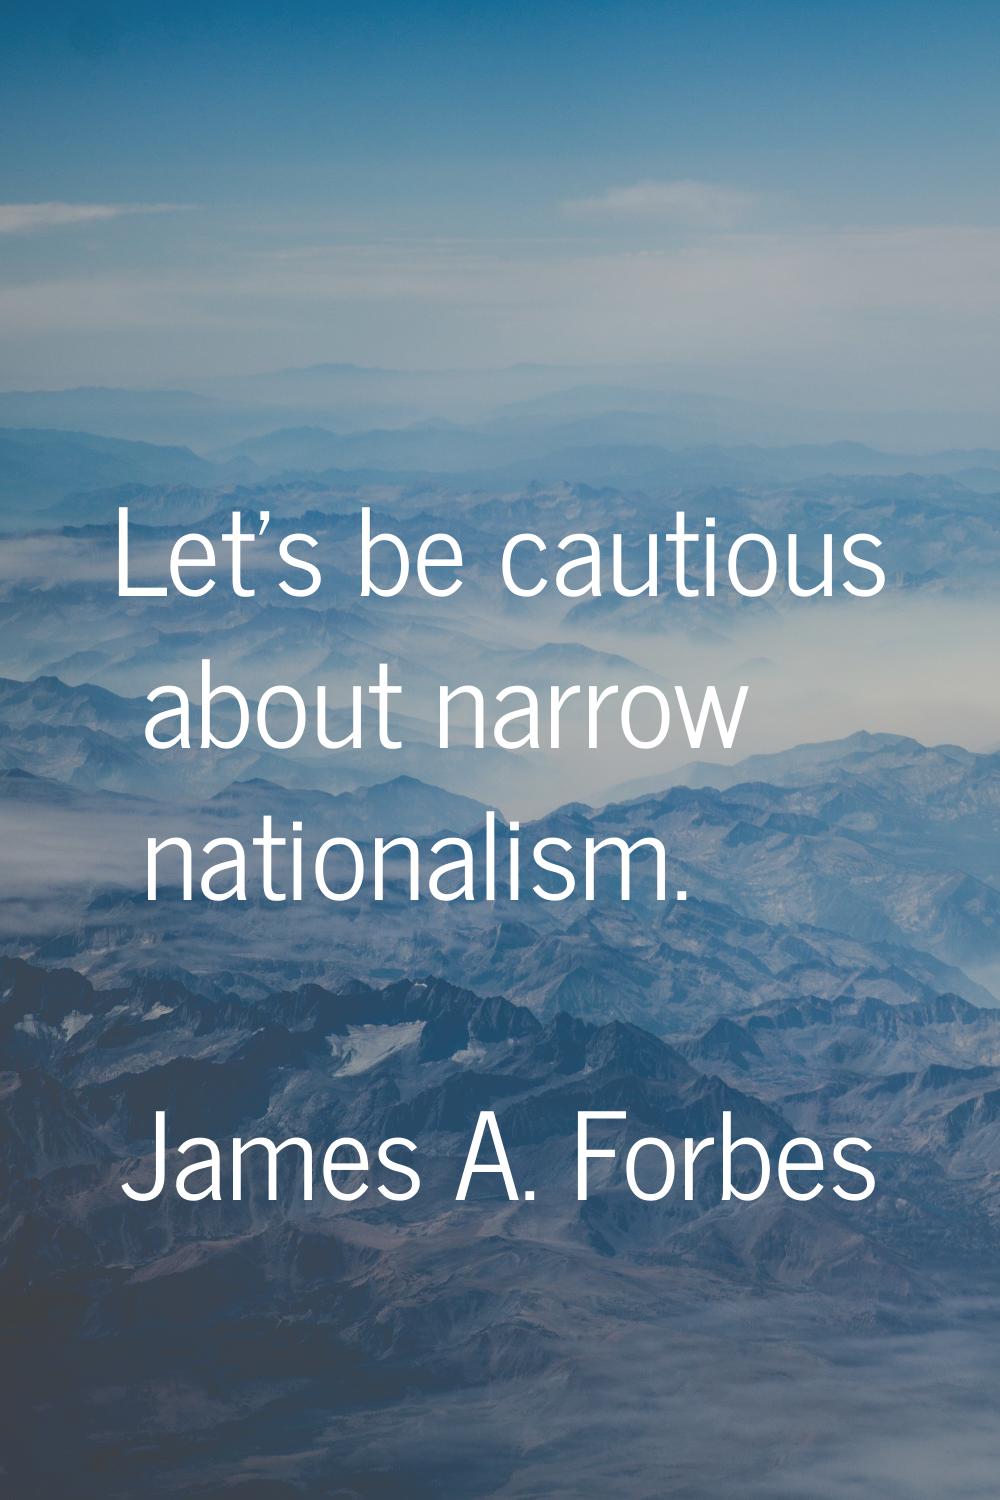 Let's be cautious about narrow nationalism.